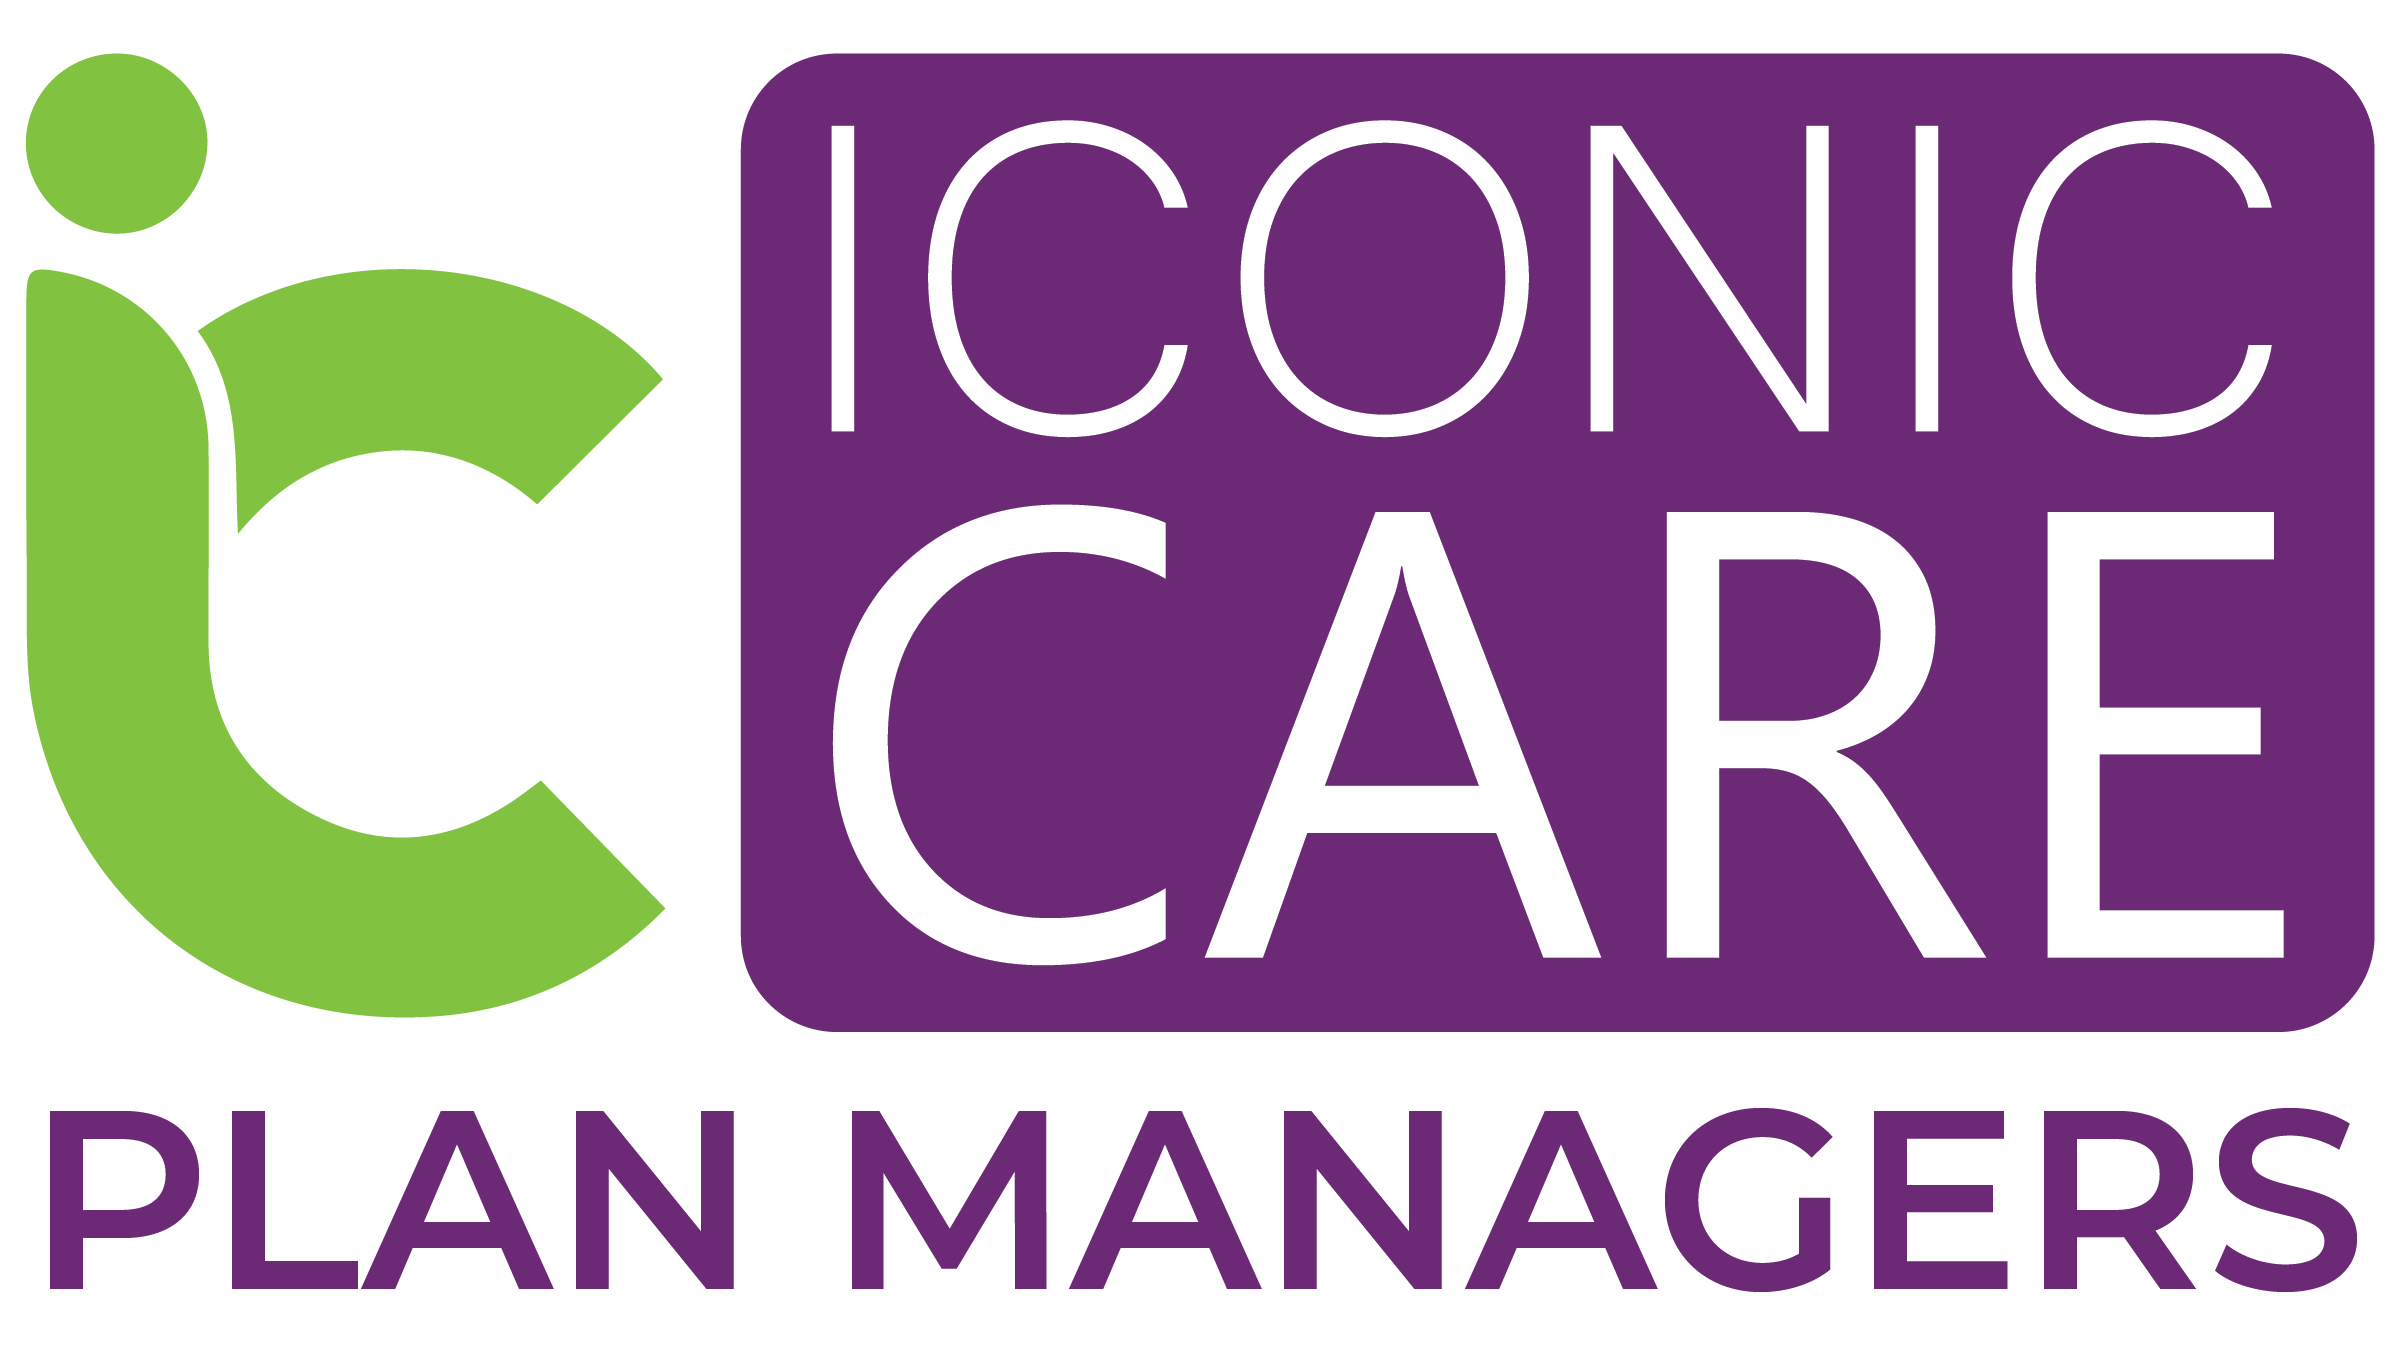 Iconic Care Plan Managers